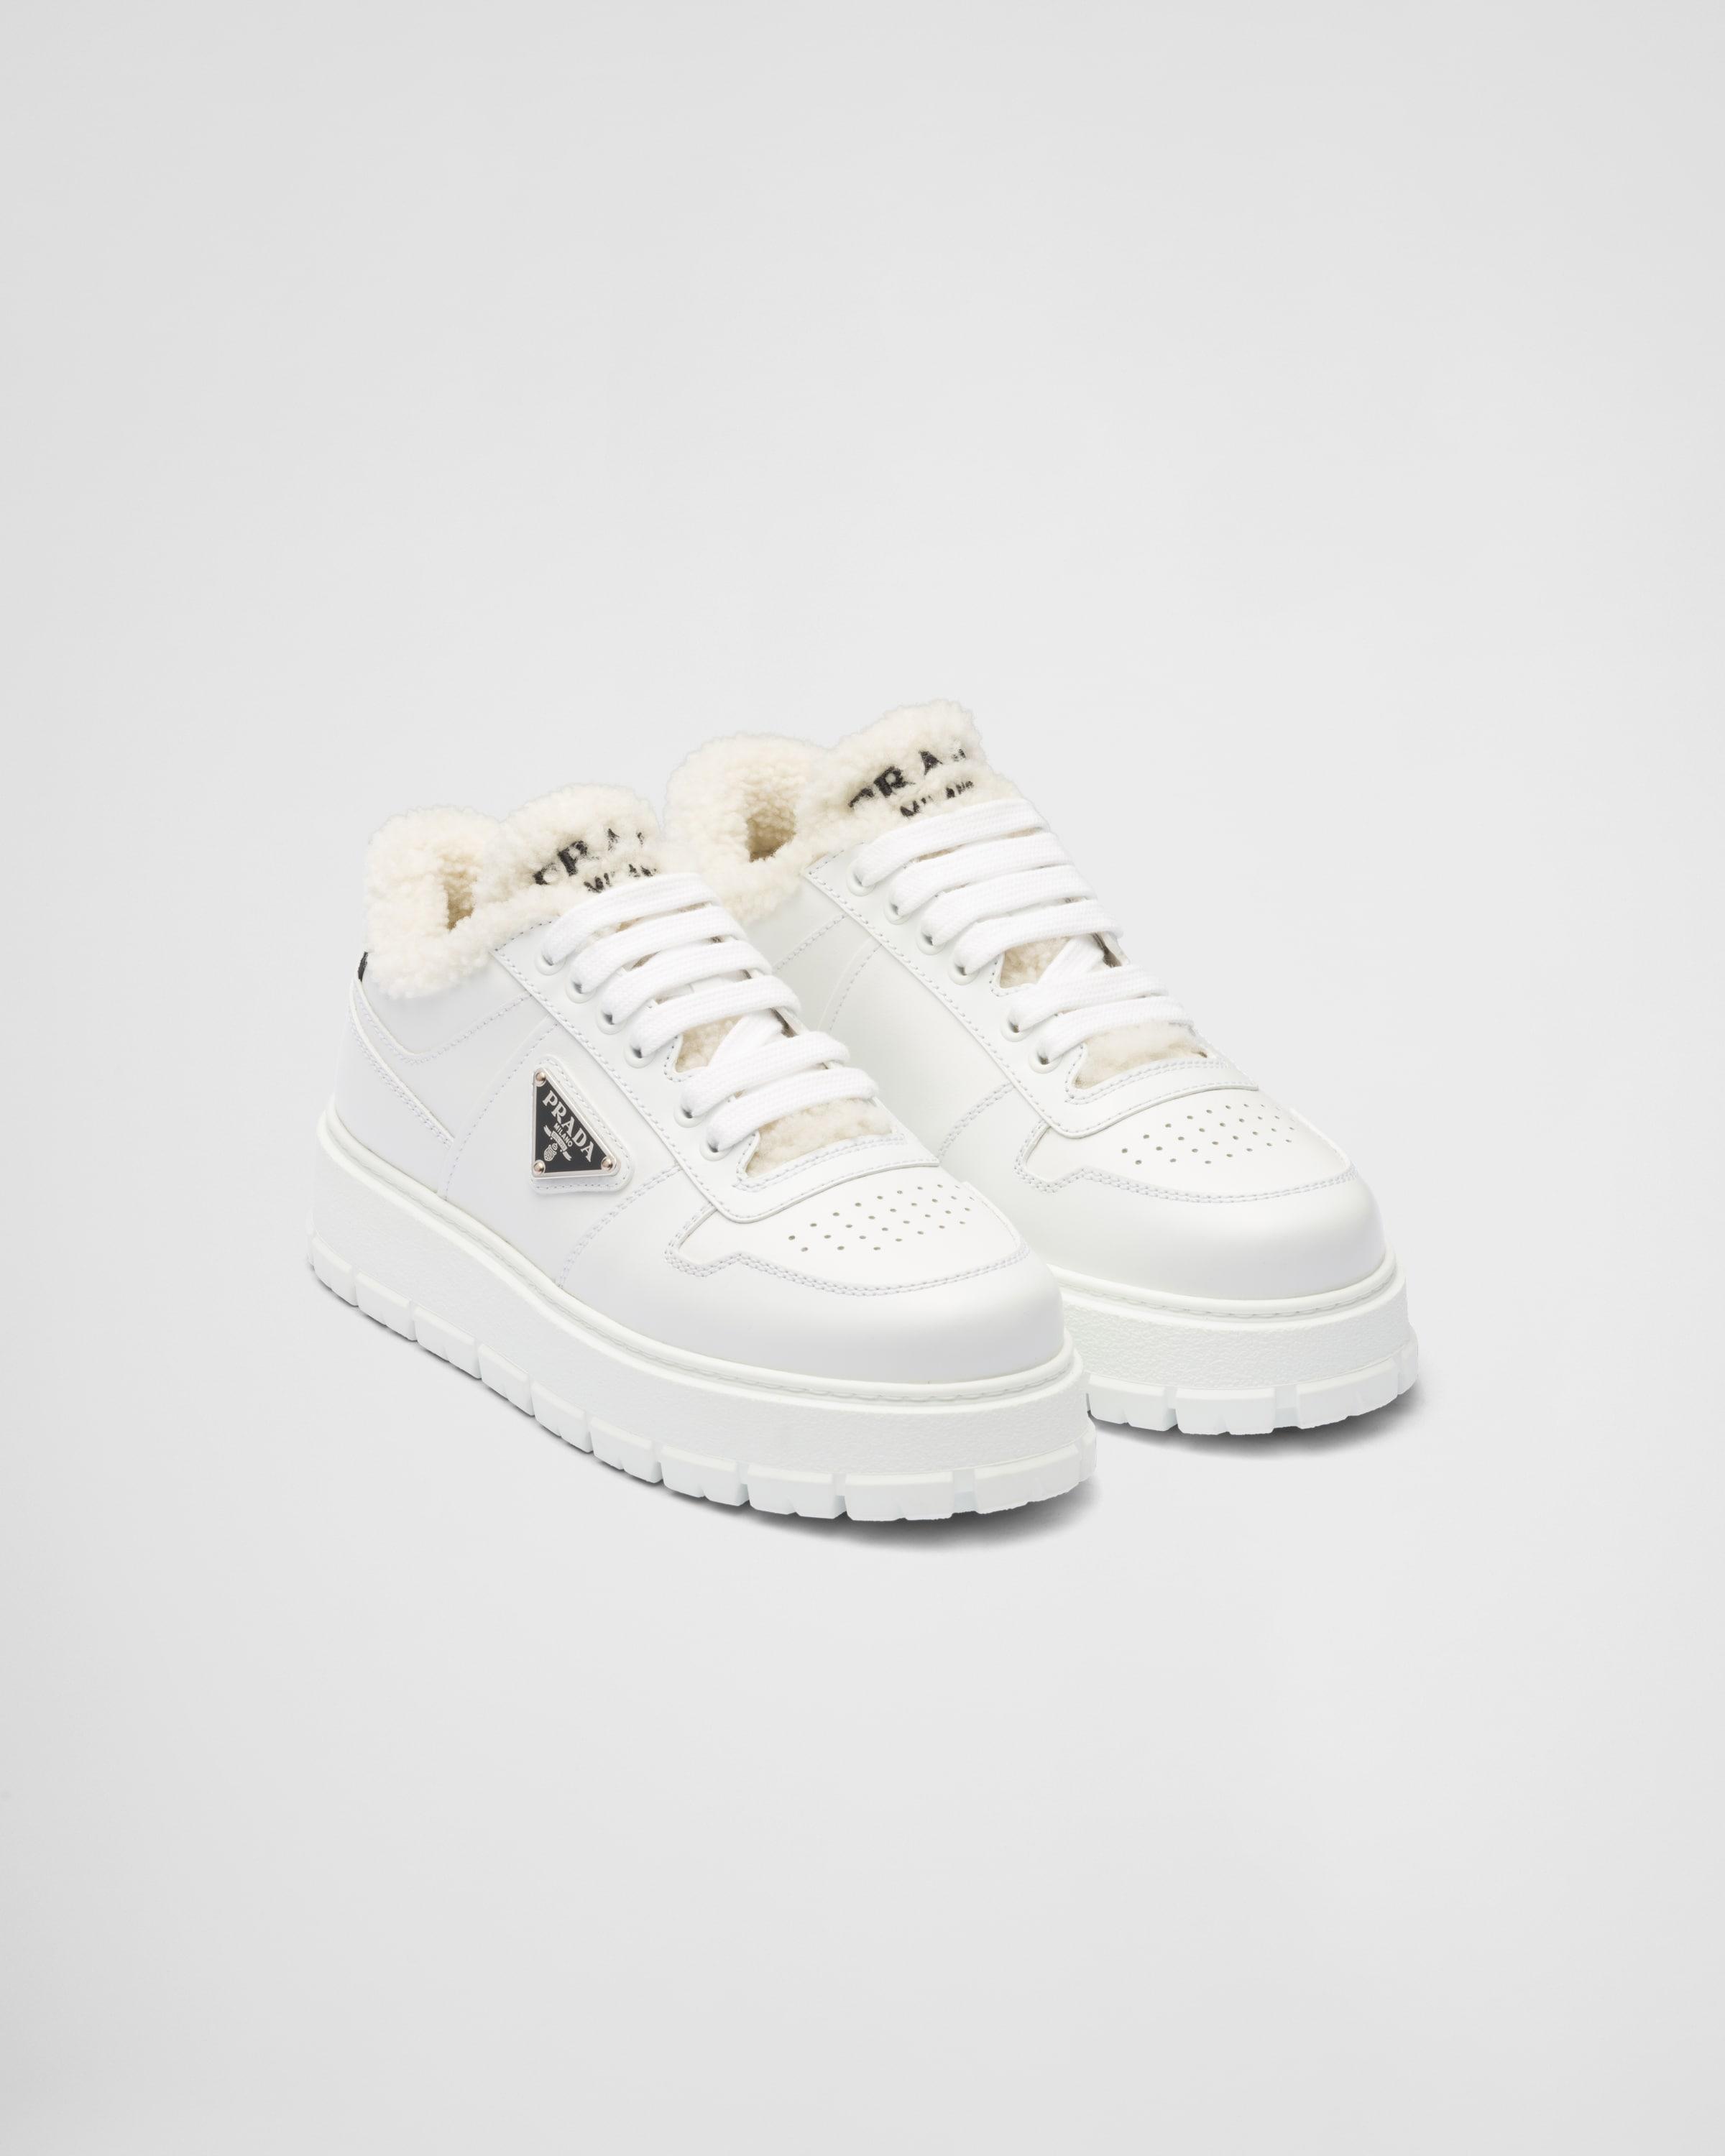 Prada Leather And Shearling Sneakers in White | Lyst